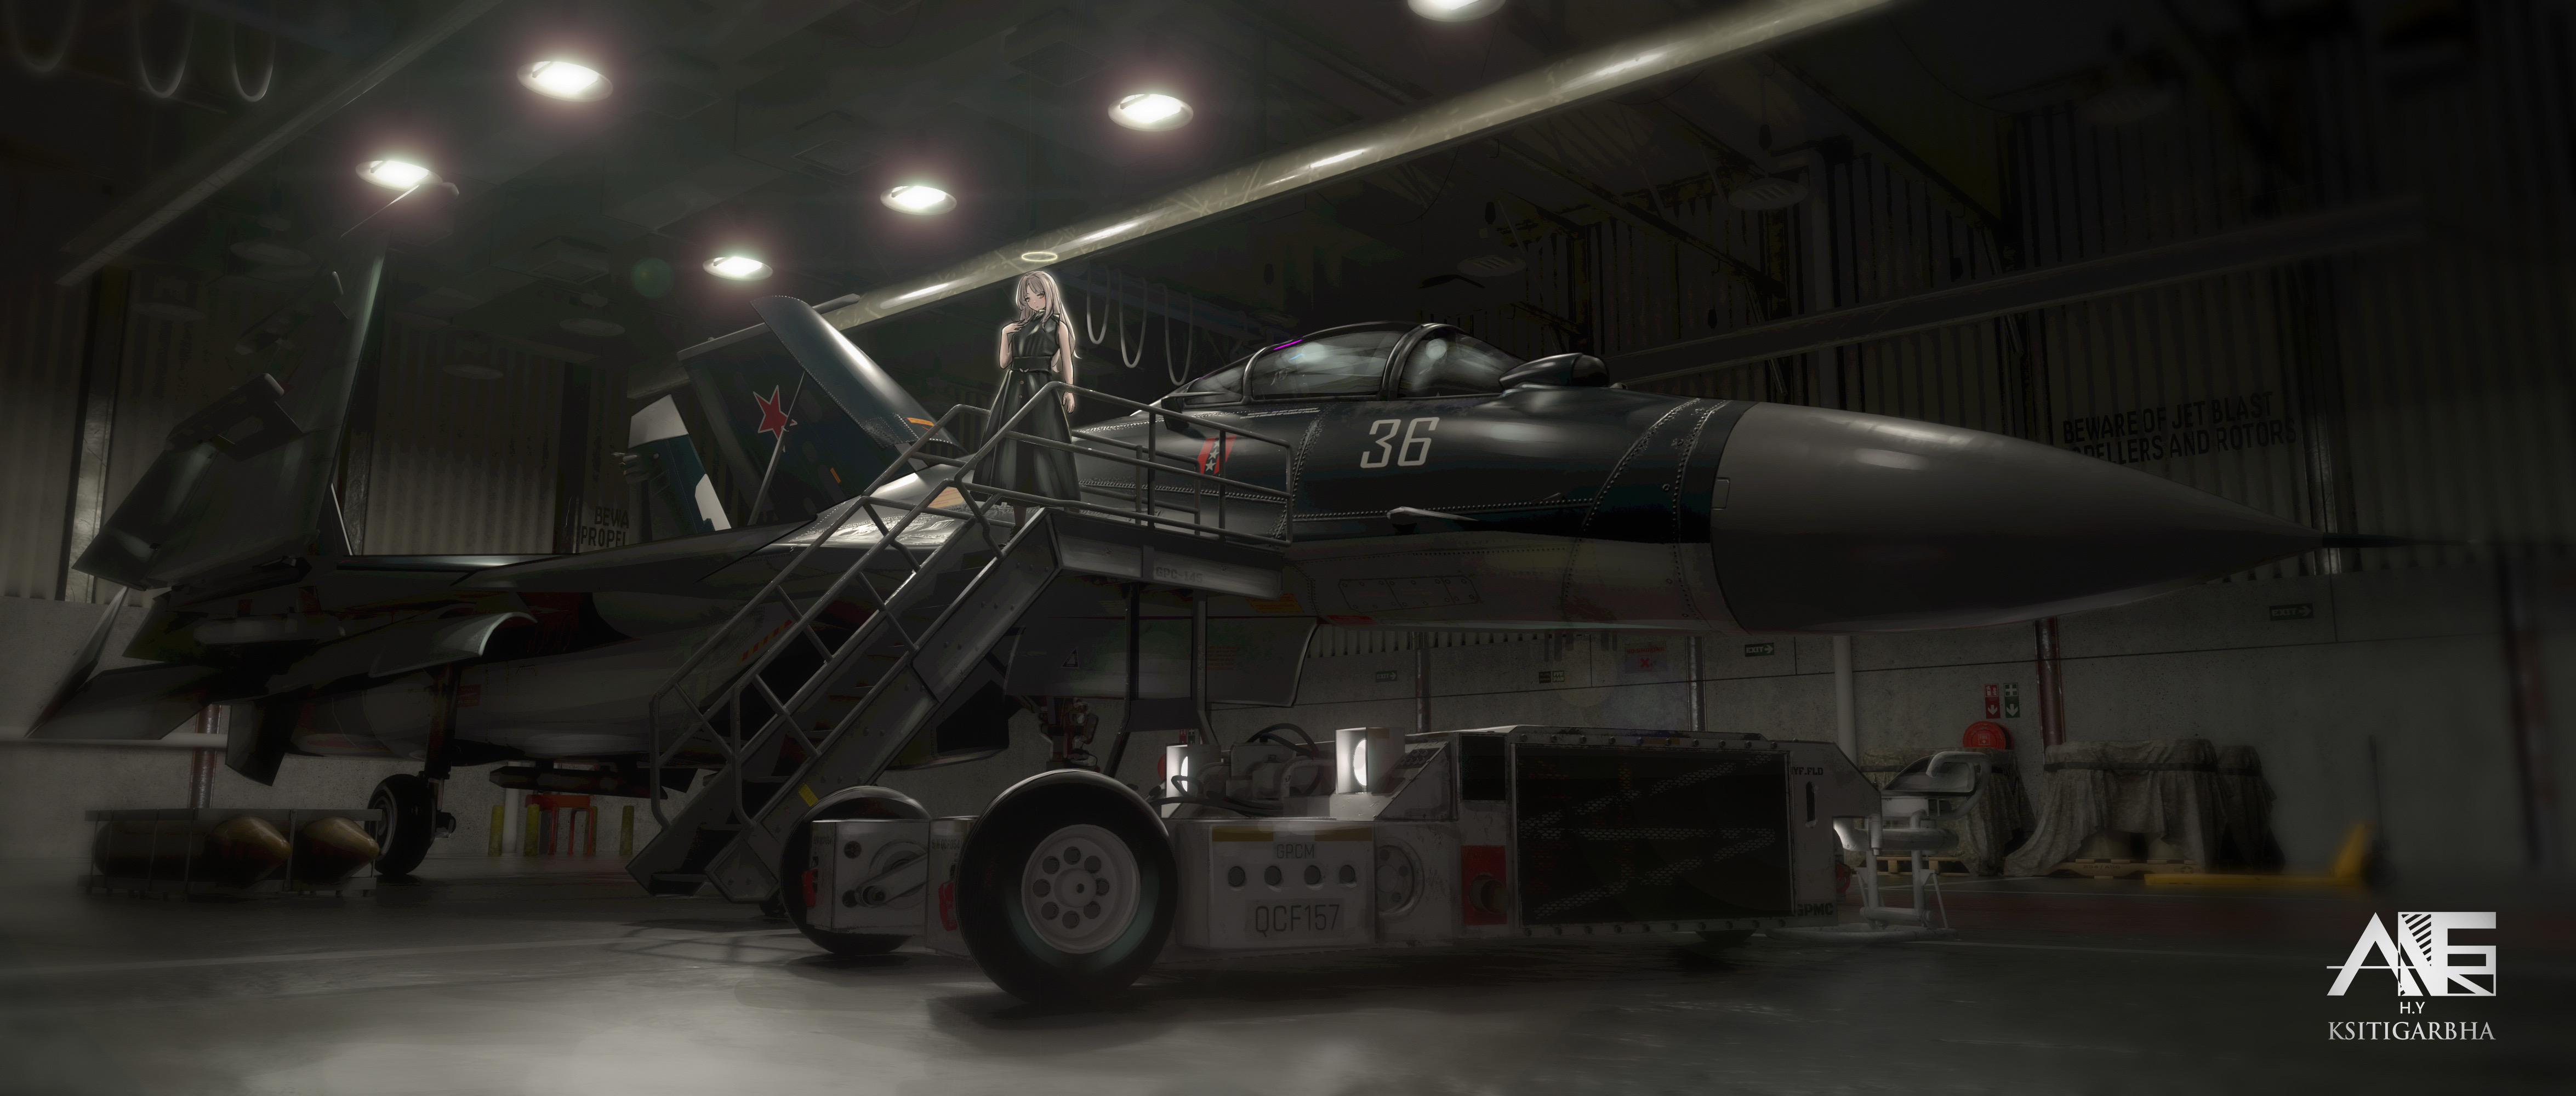 Anime 4700x2000 Pang Zaizhi science fiction anime anime girls jet fighter aircraft military military vehicle vehicle Pixiv military aircraft Sukhoi Su-30 artwork digital painting